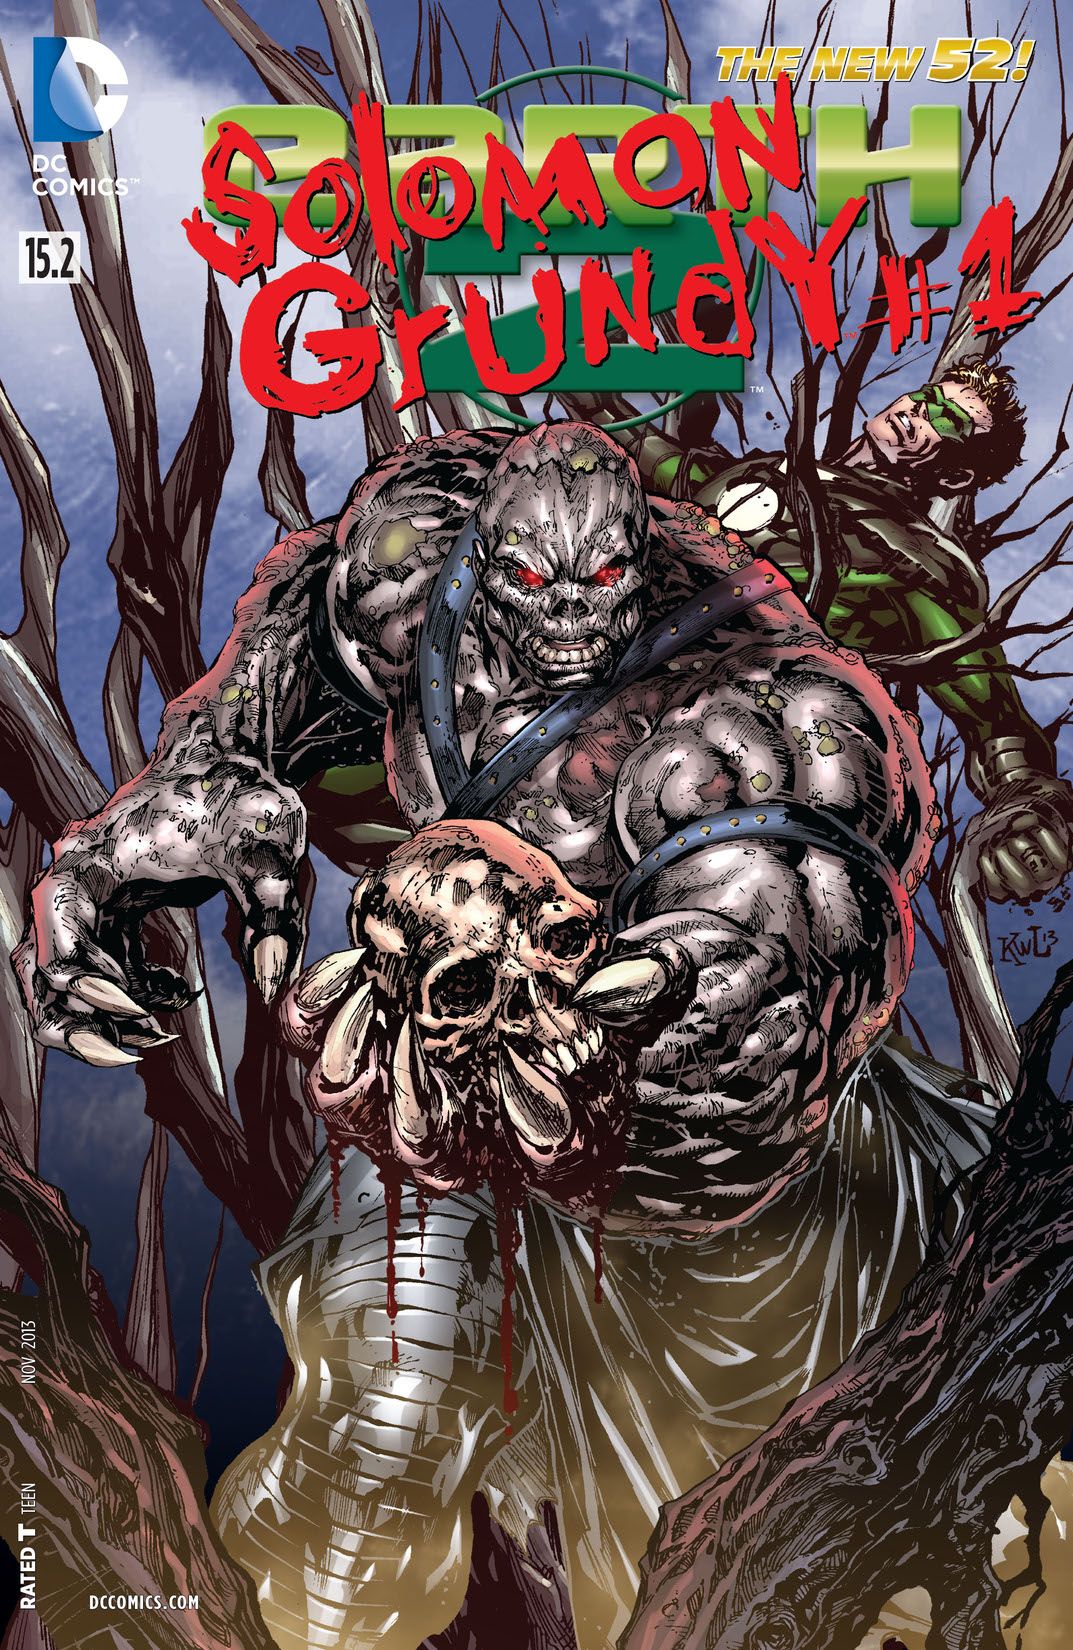 Earth 2 feat Solomon Grundy #15.2 preview images